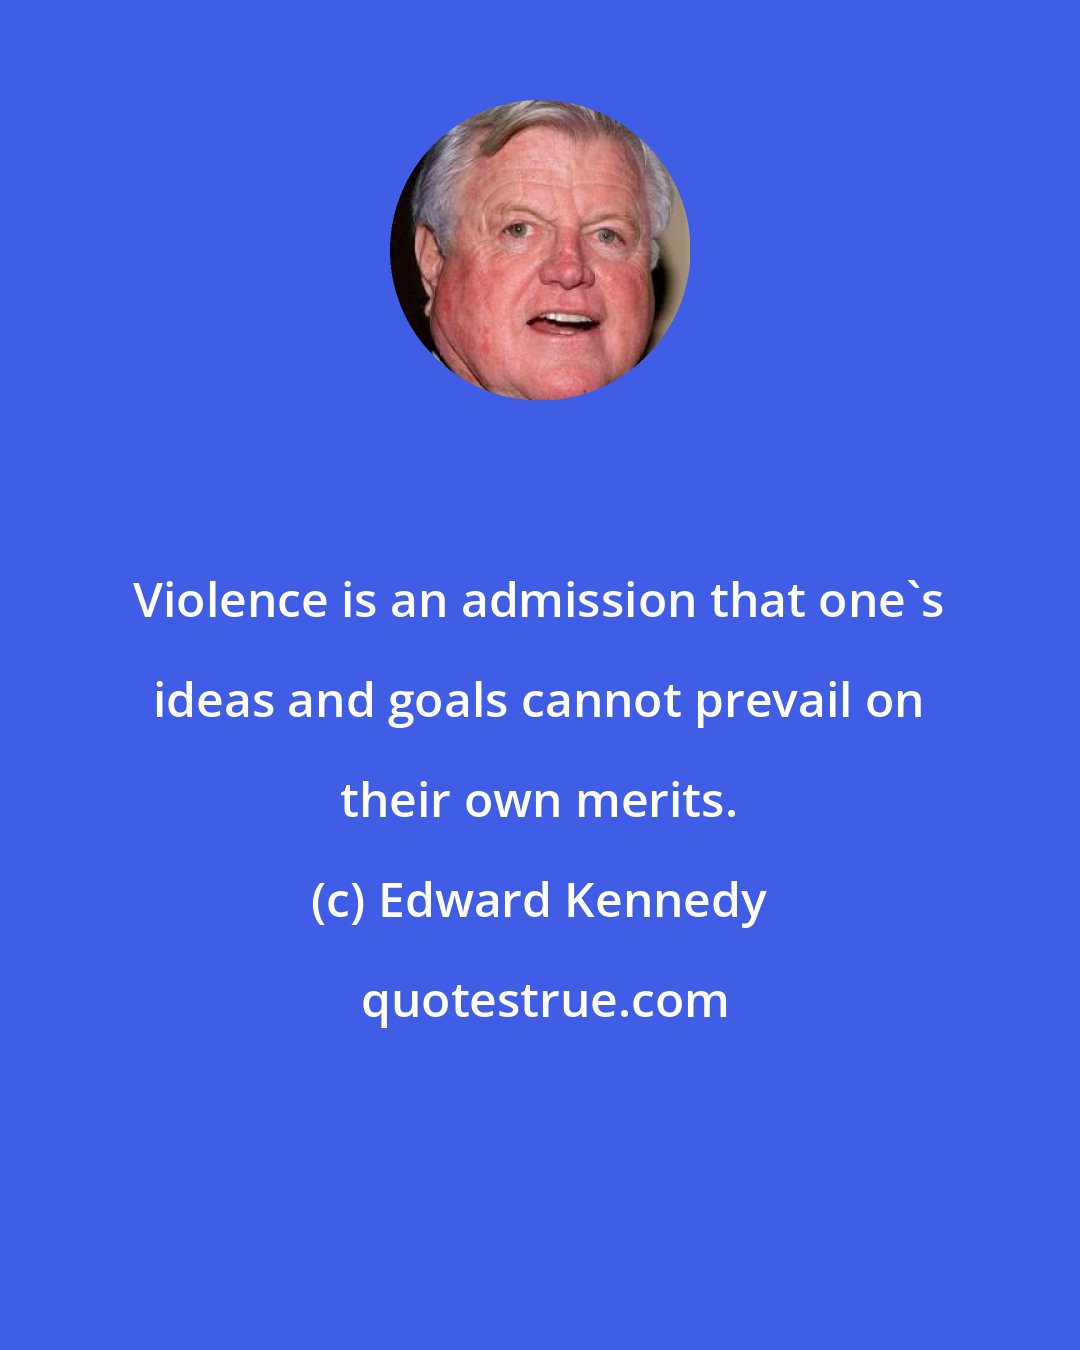 Edward Kennedy: Violence is an admission that one's ideas and goals cannot prevail on their own merits.